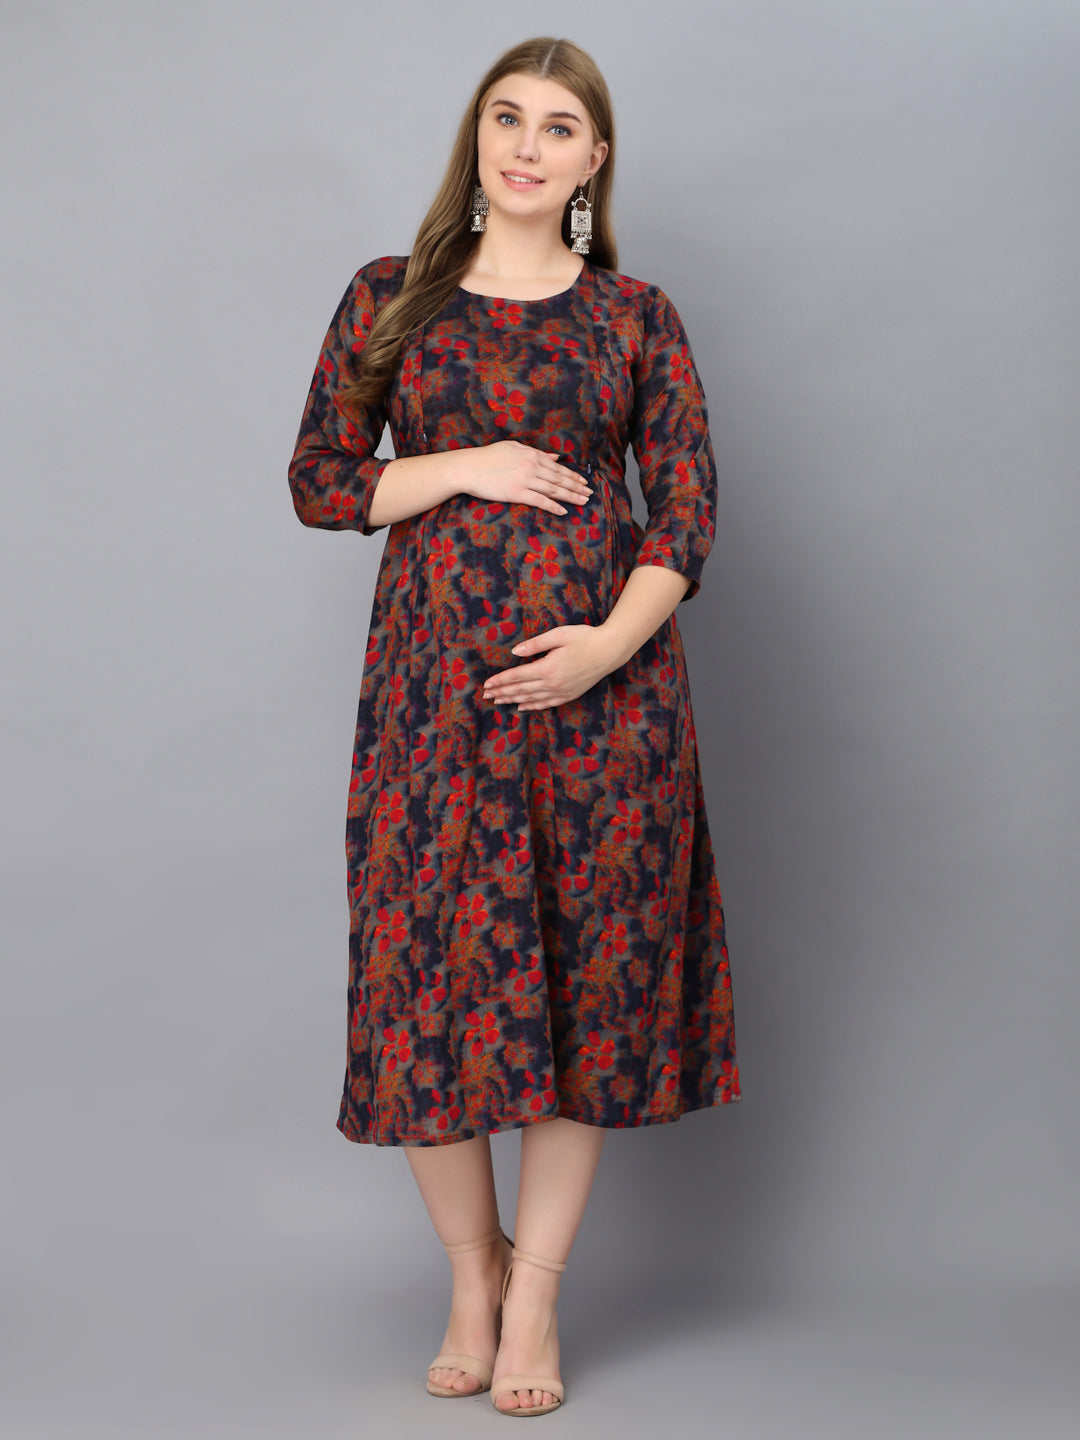 Night Dress For Pregnant Ladies | Maternity Feeding Gowns For Women ...